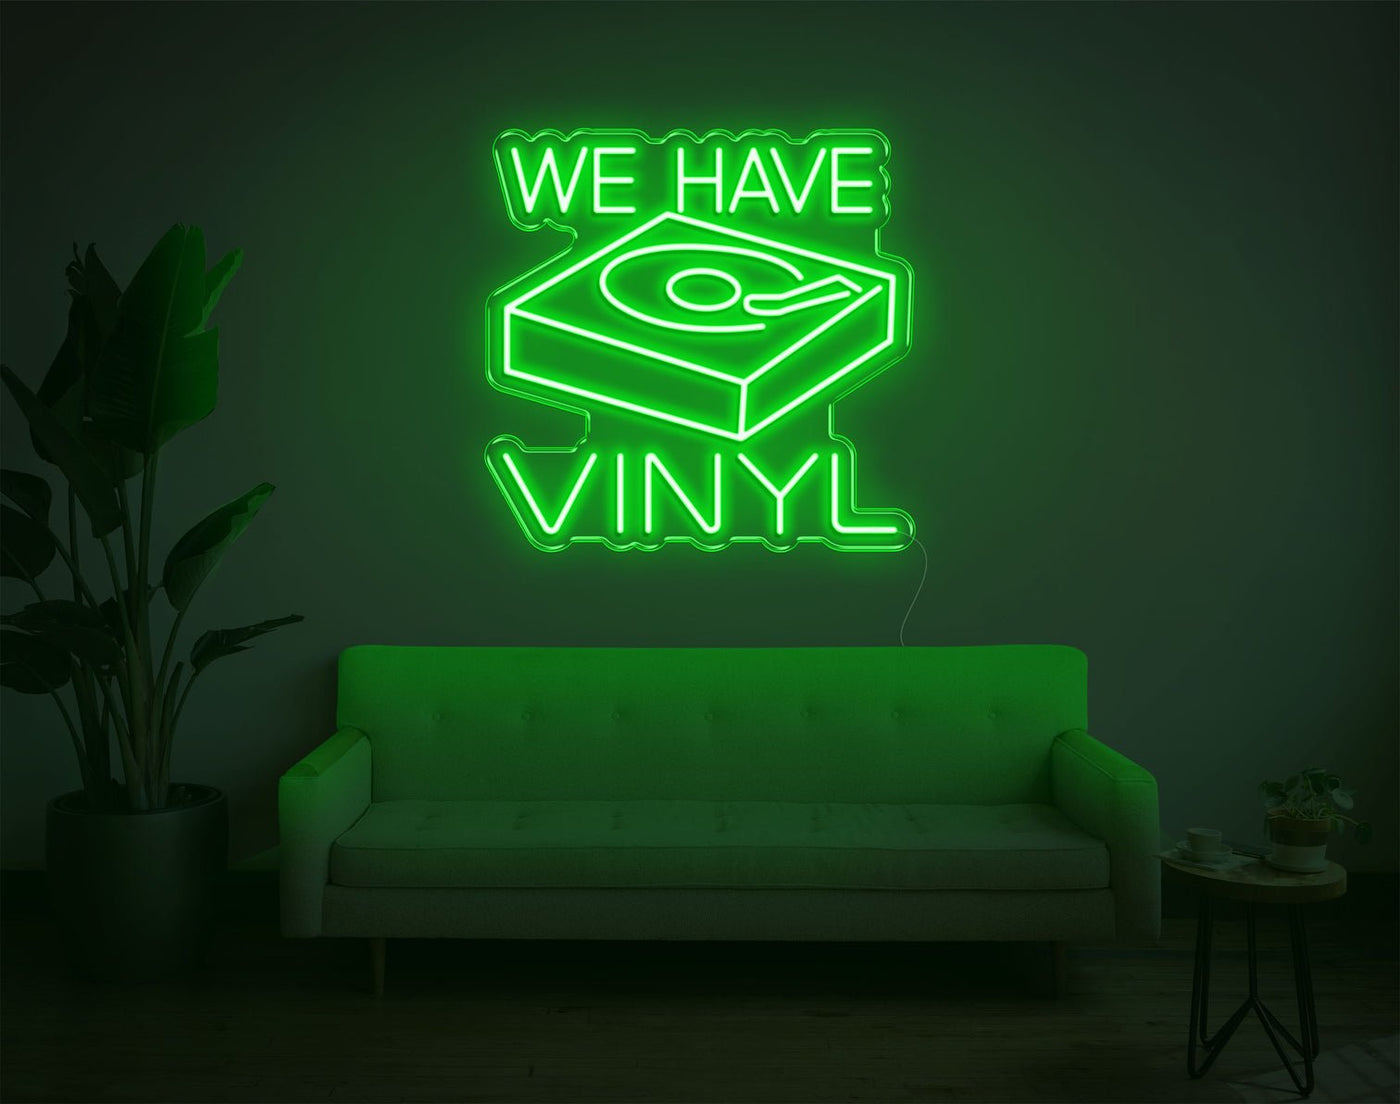 We Have Vinyl LED Neon Sign - 20inch x 20inchGreen